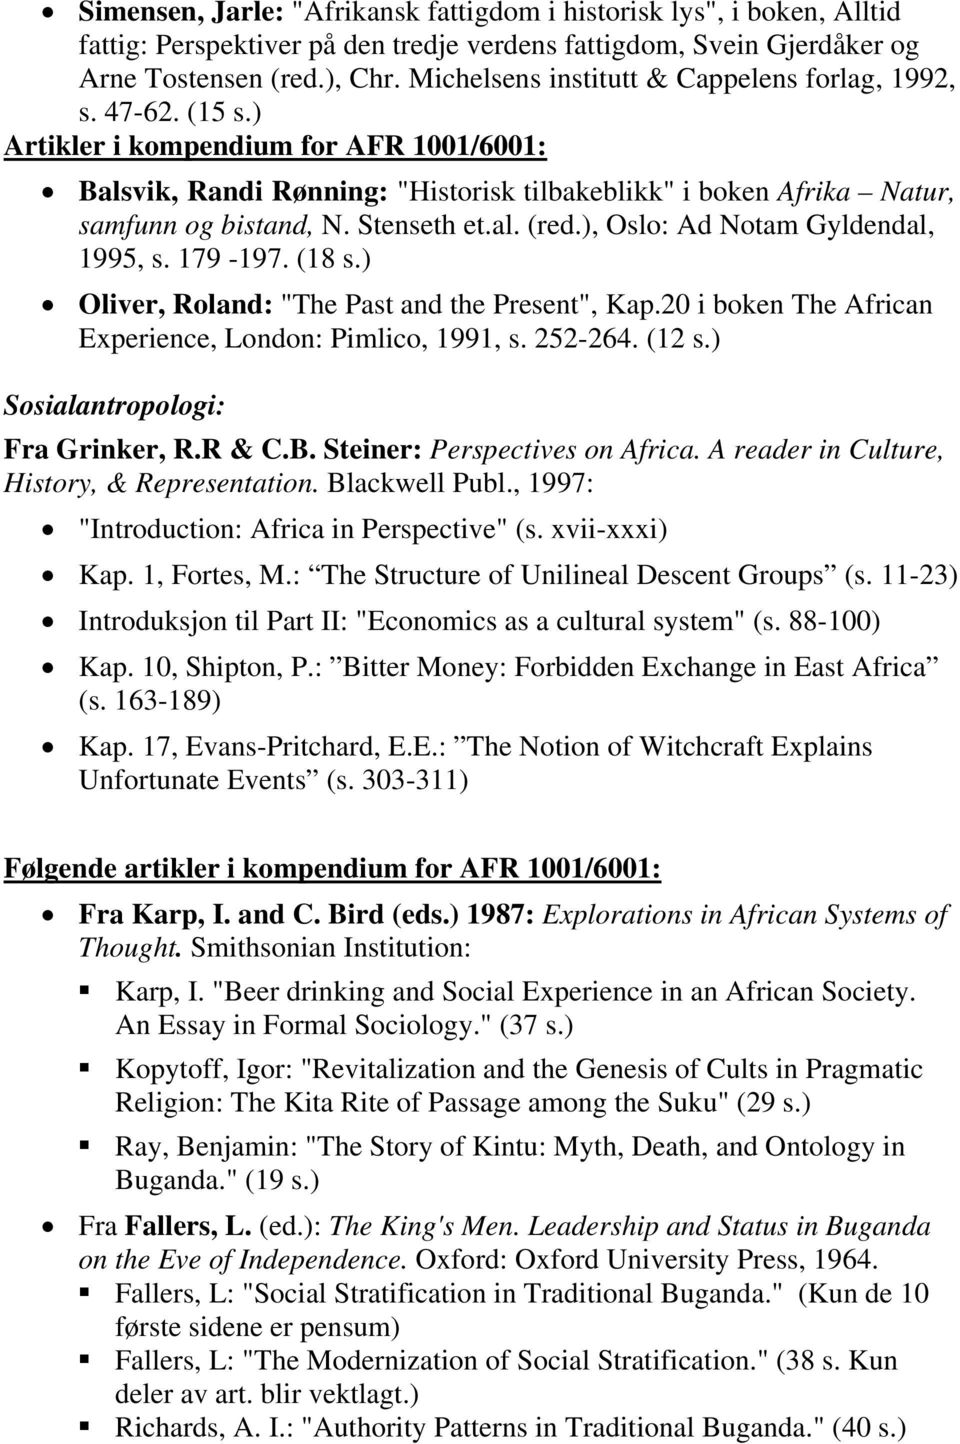 Stenseth et.al. (red.), Oslo: Ad Notam Gyldendal, 1995, s. 179-197. (18 s.) Oliver, Roland: "The Past and the Present", Kap.20 i boken The African Experience, London: Pimlico, 1991, s. 252-264. (12 s.